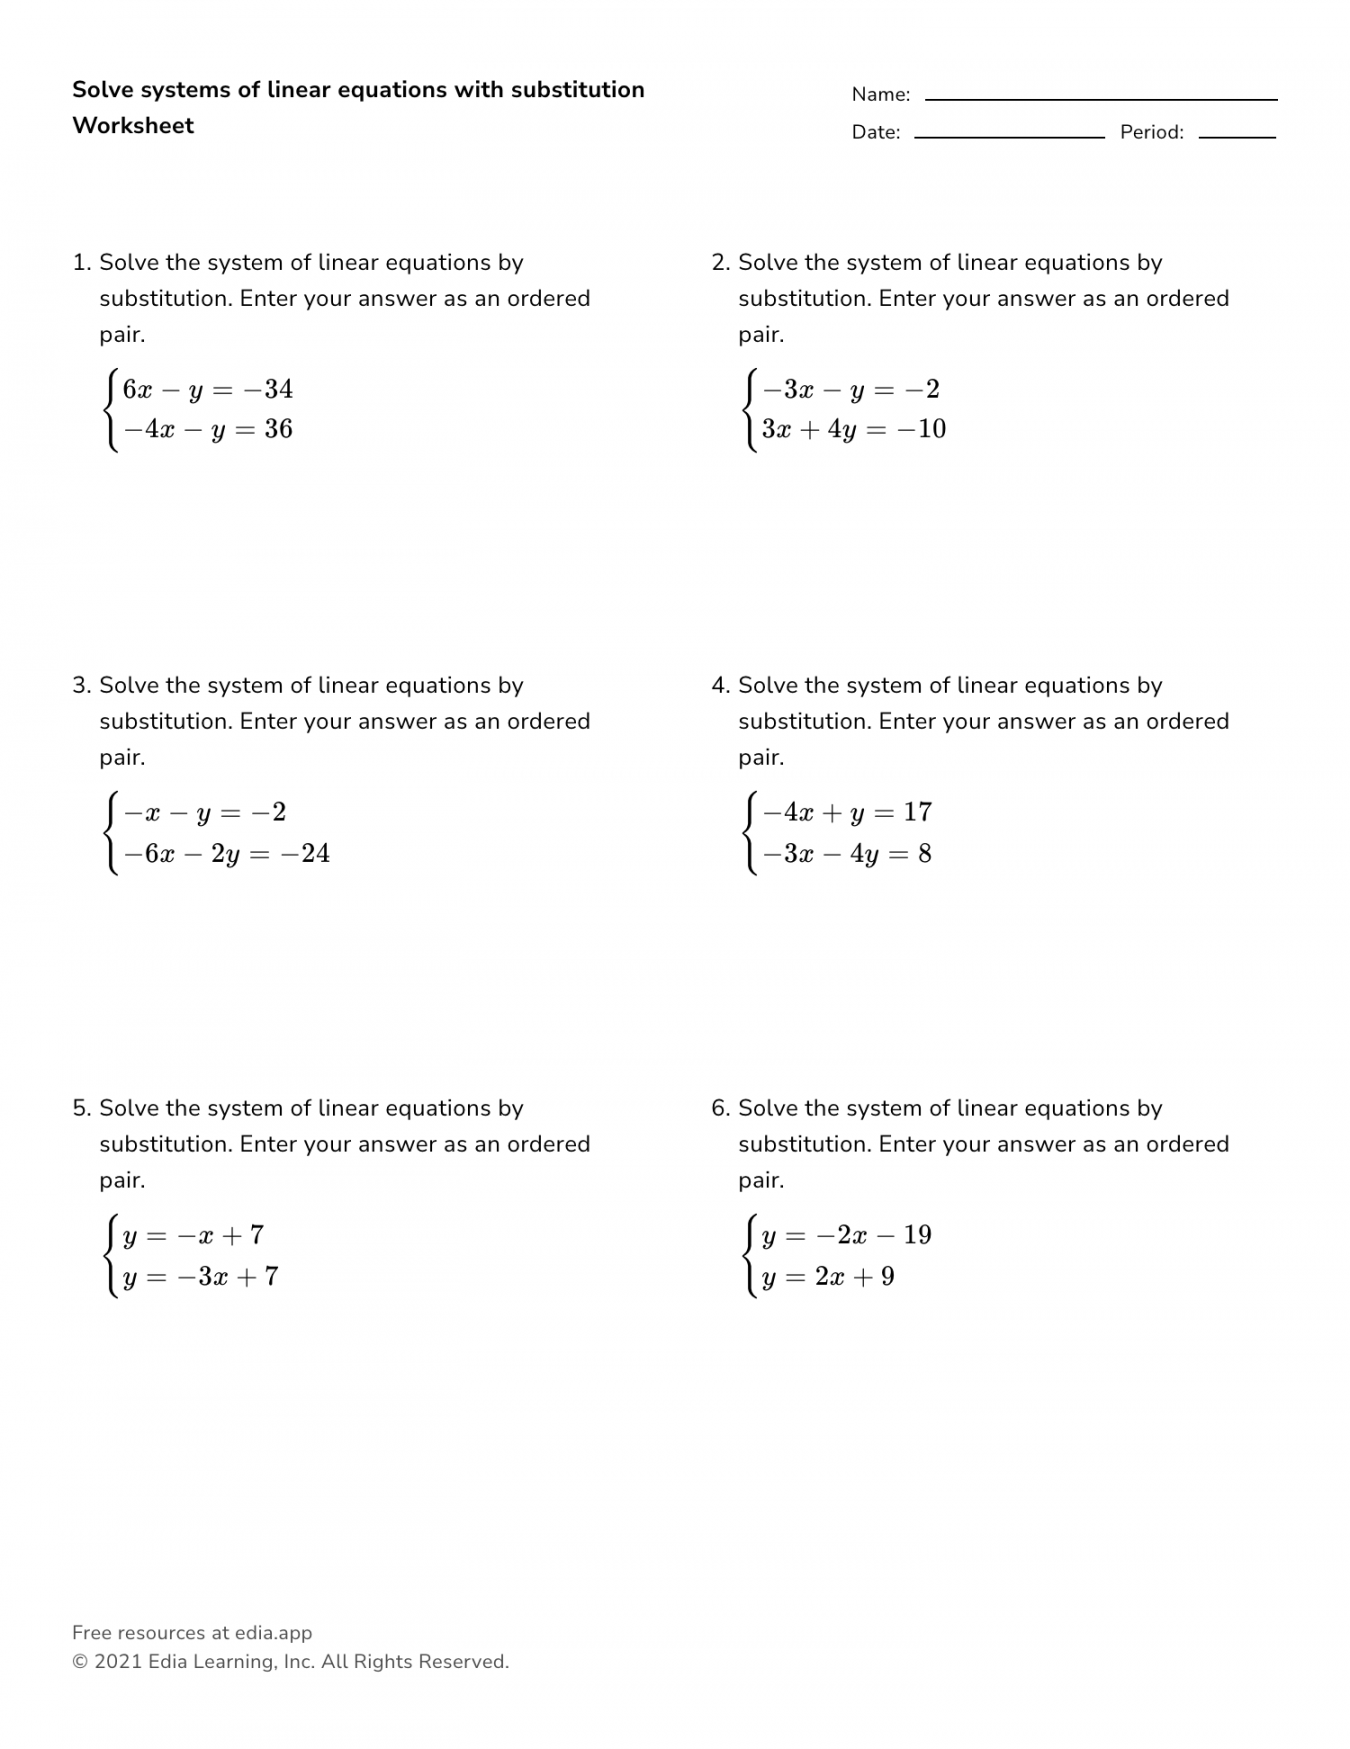 Solve Systems Of Linear Equations With Substitution - Worksheet